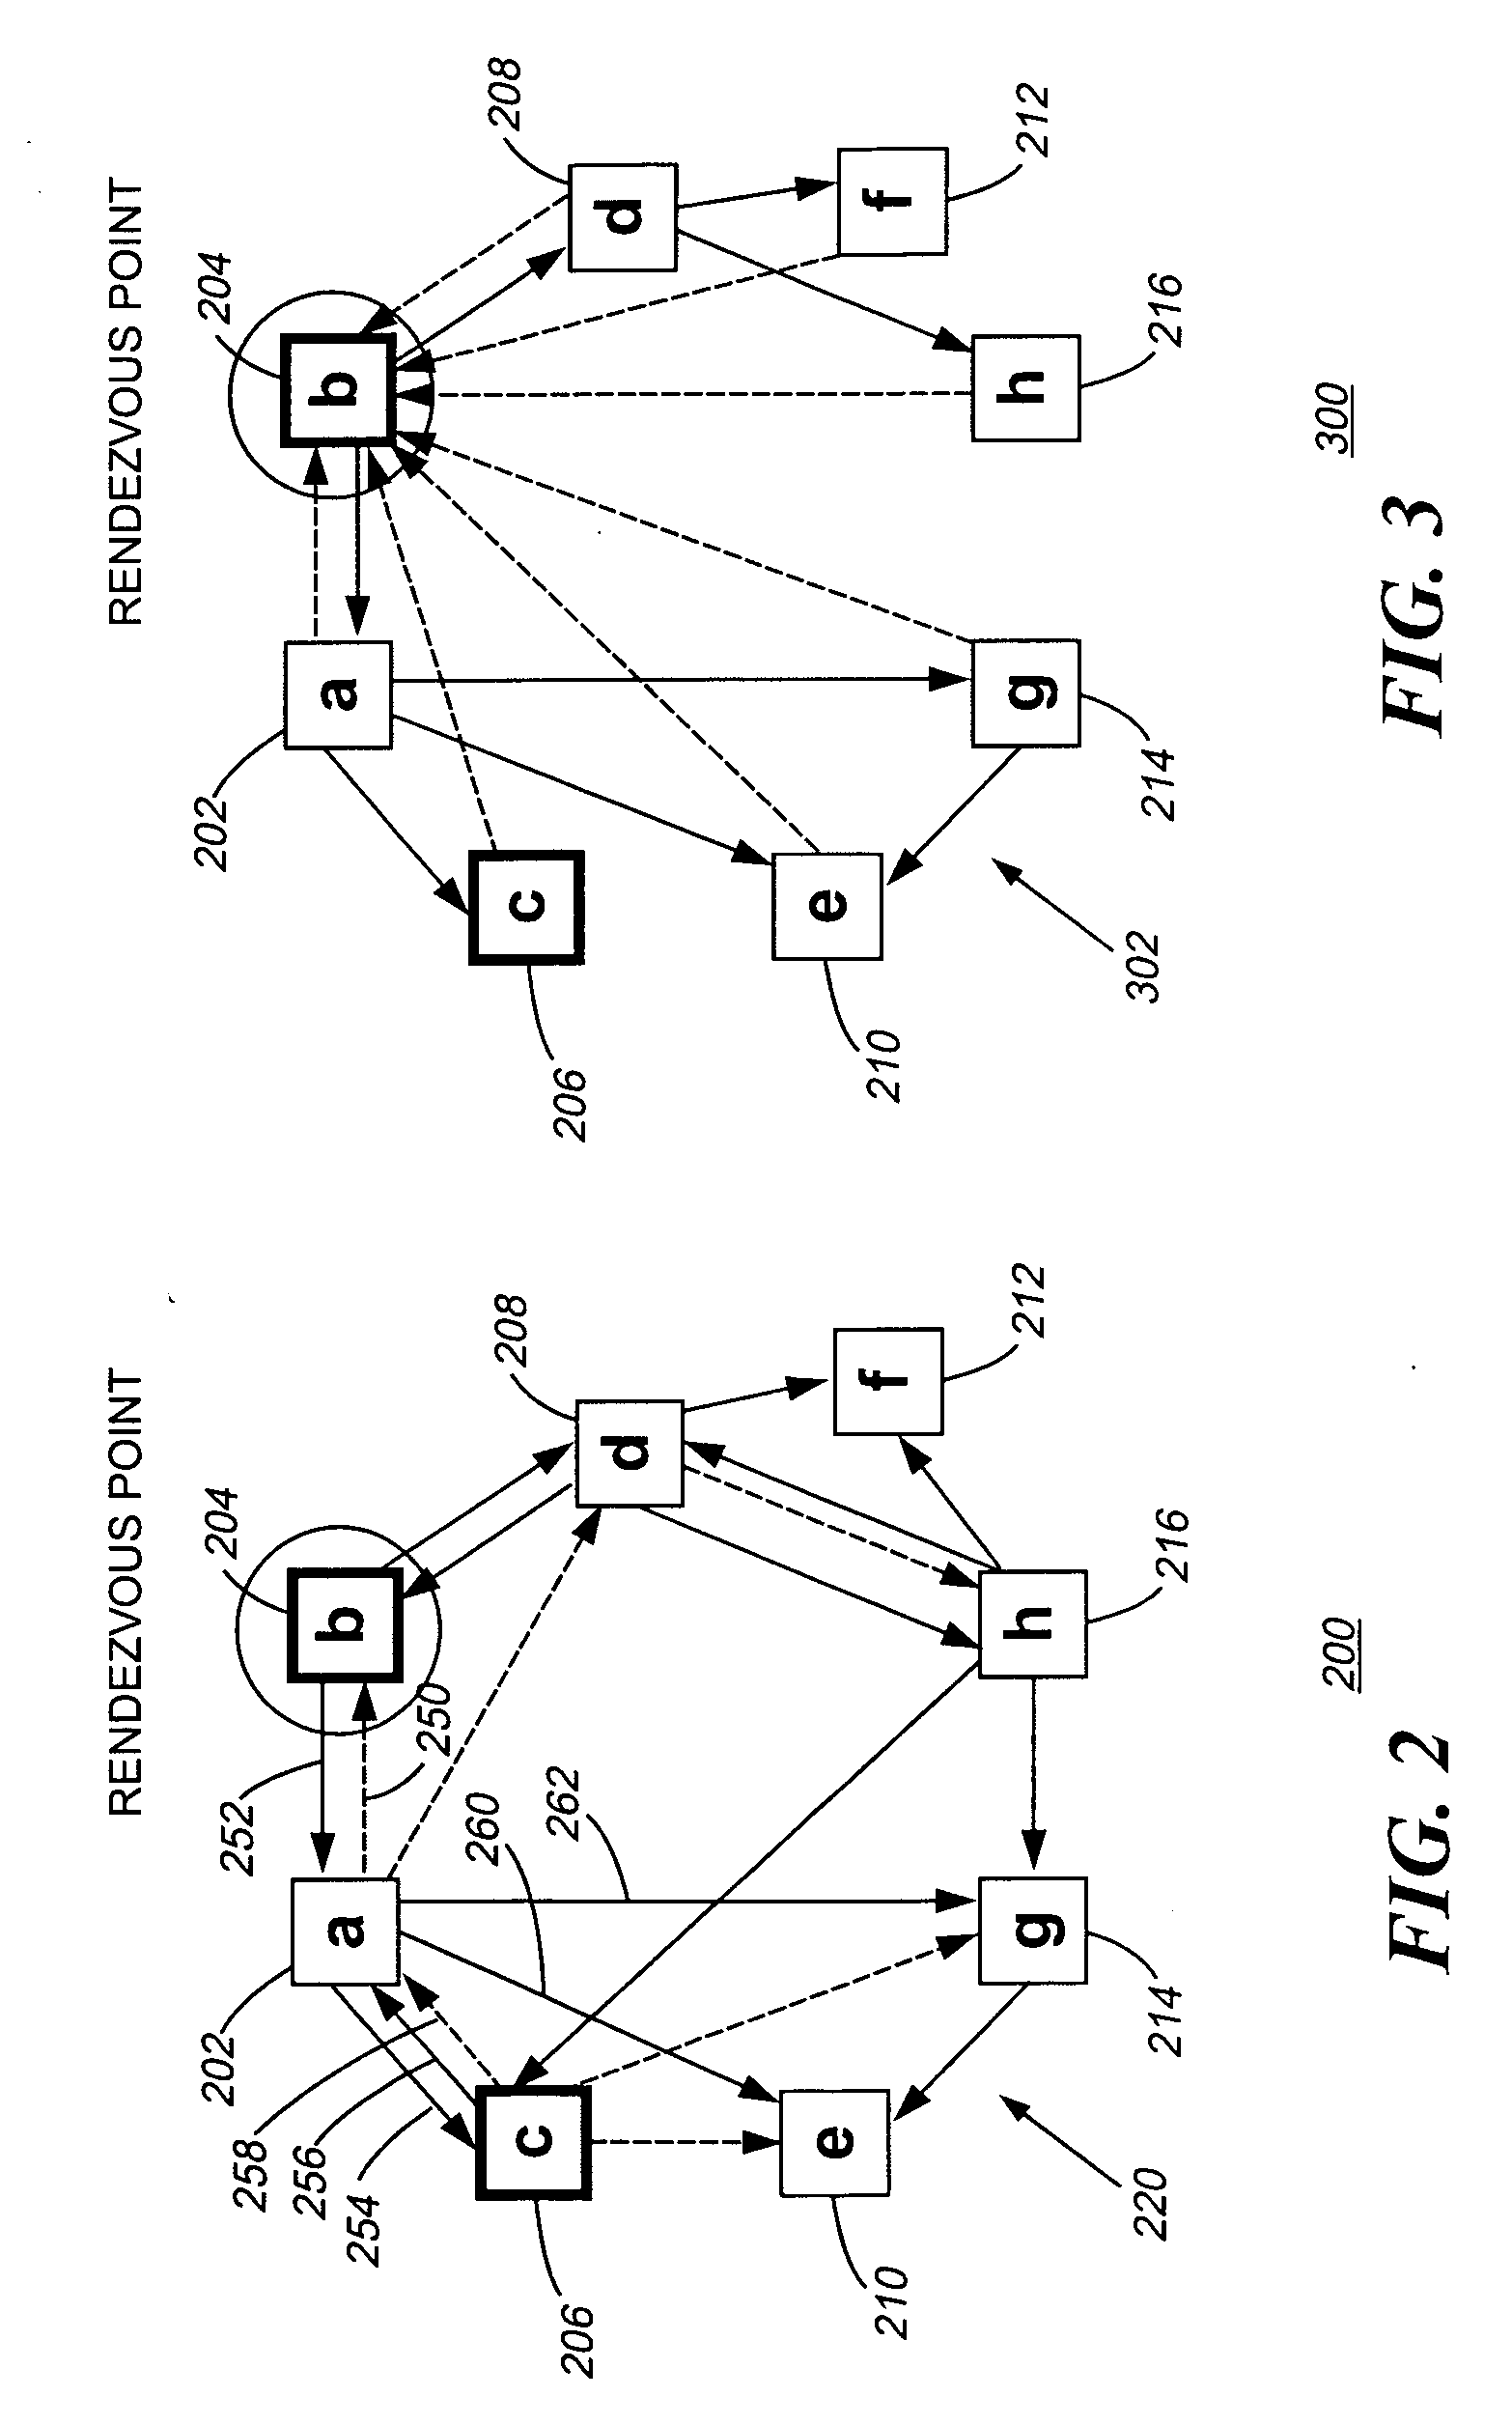 System and method for peer-to-peer multi-party voice-over-IP services